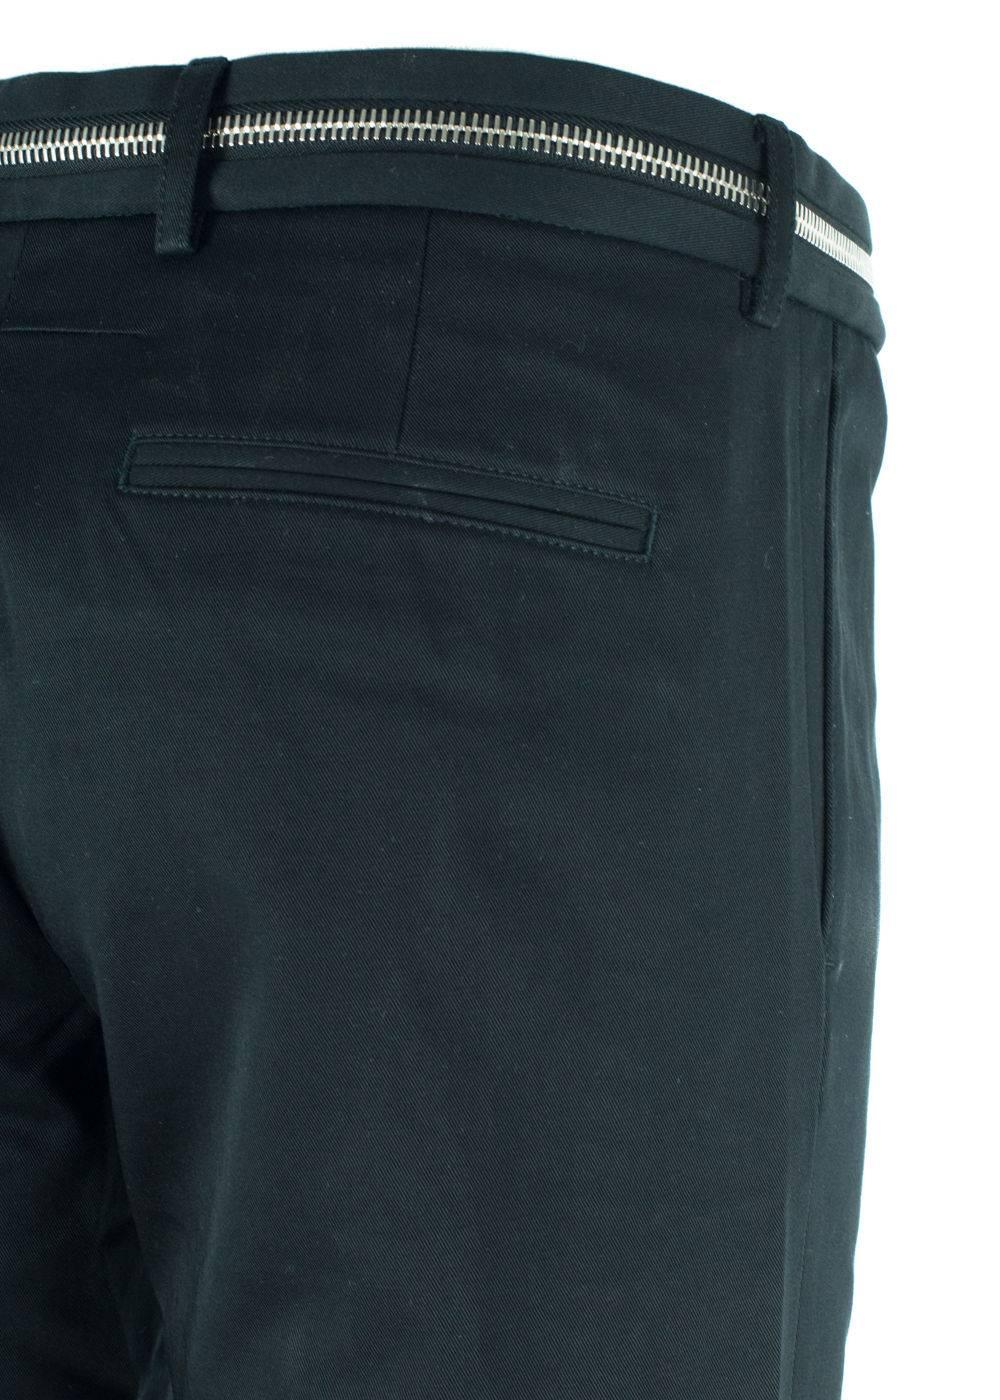 Givenchy Men's 100% Cotton Black W/ Zipper Pants In New Condition For Sale In Brooklyn, NY